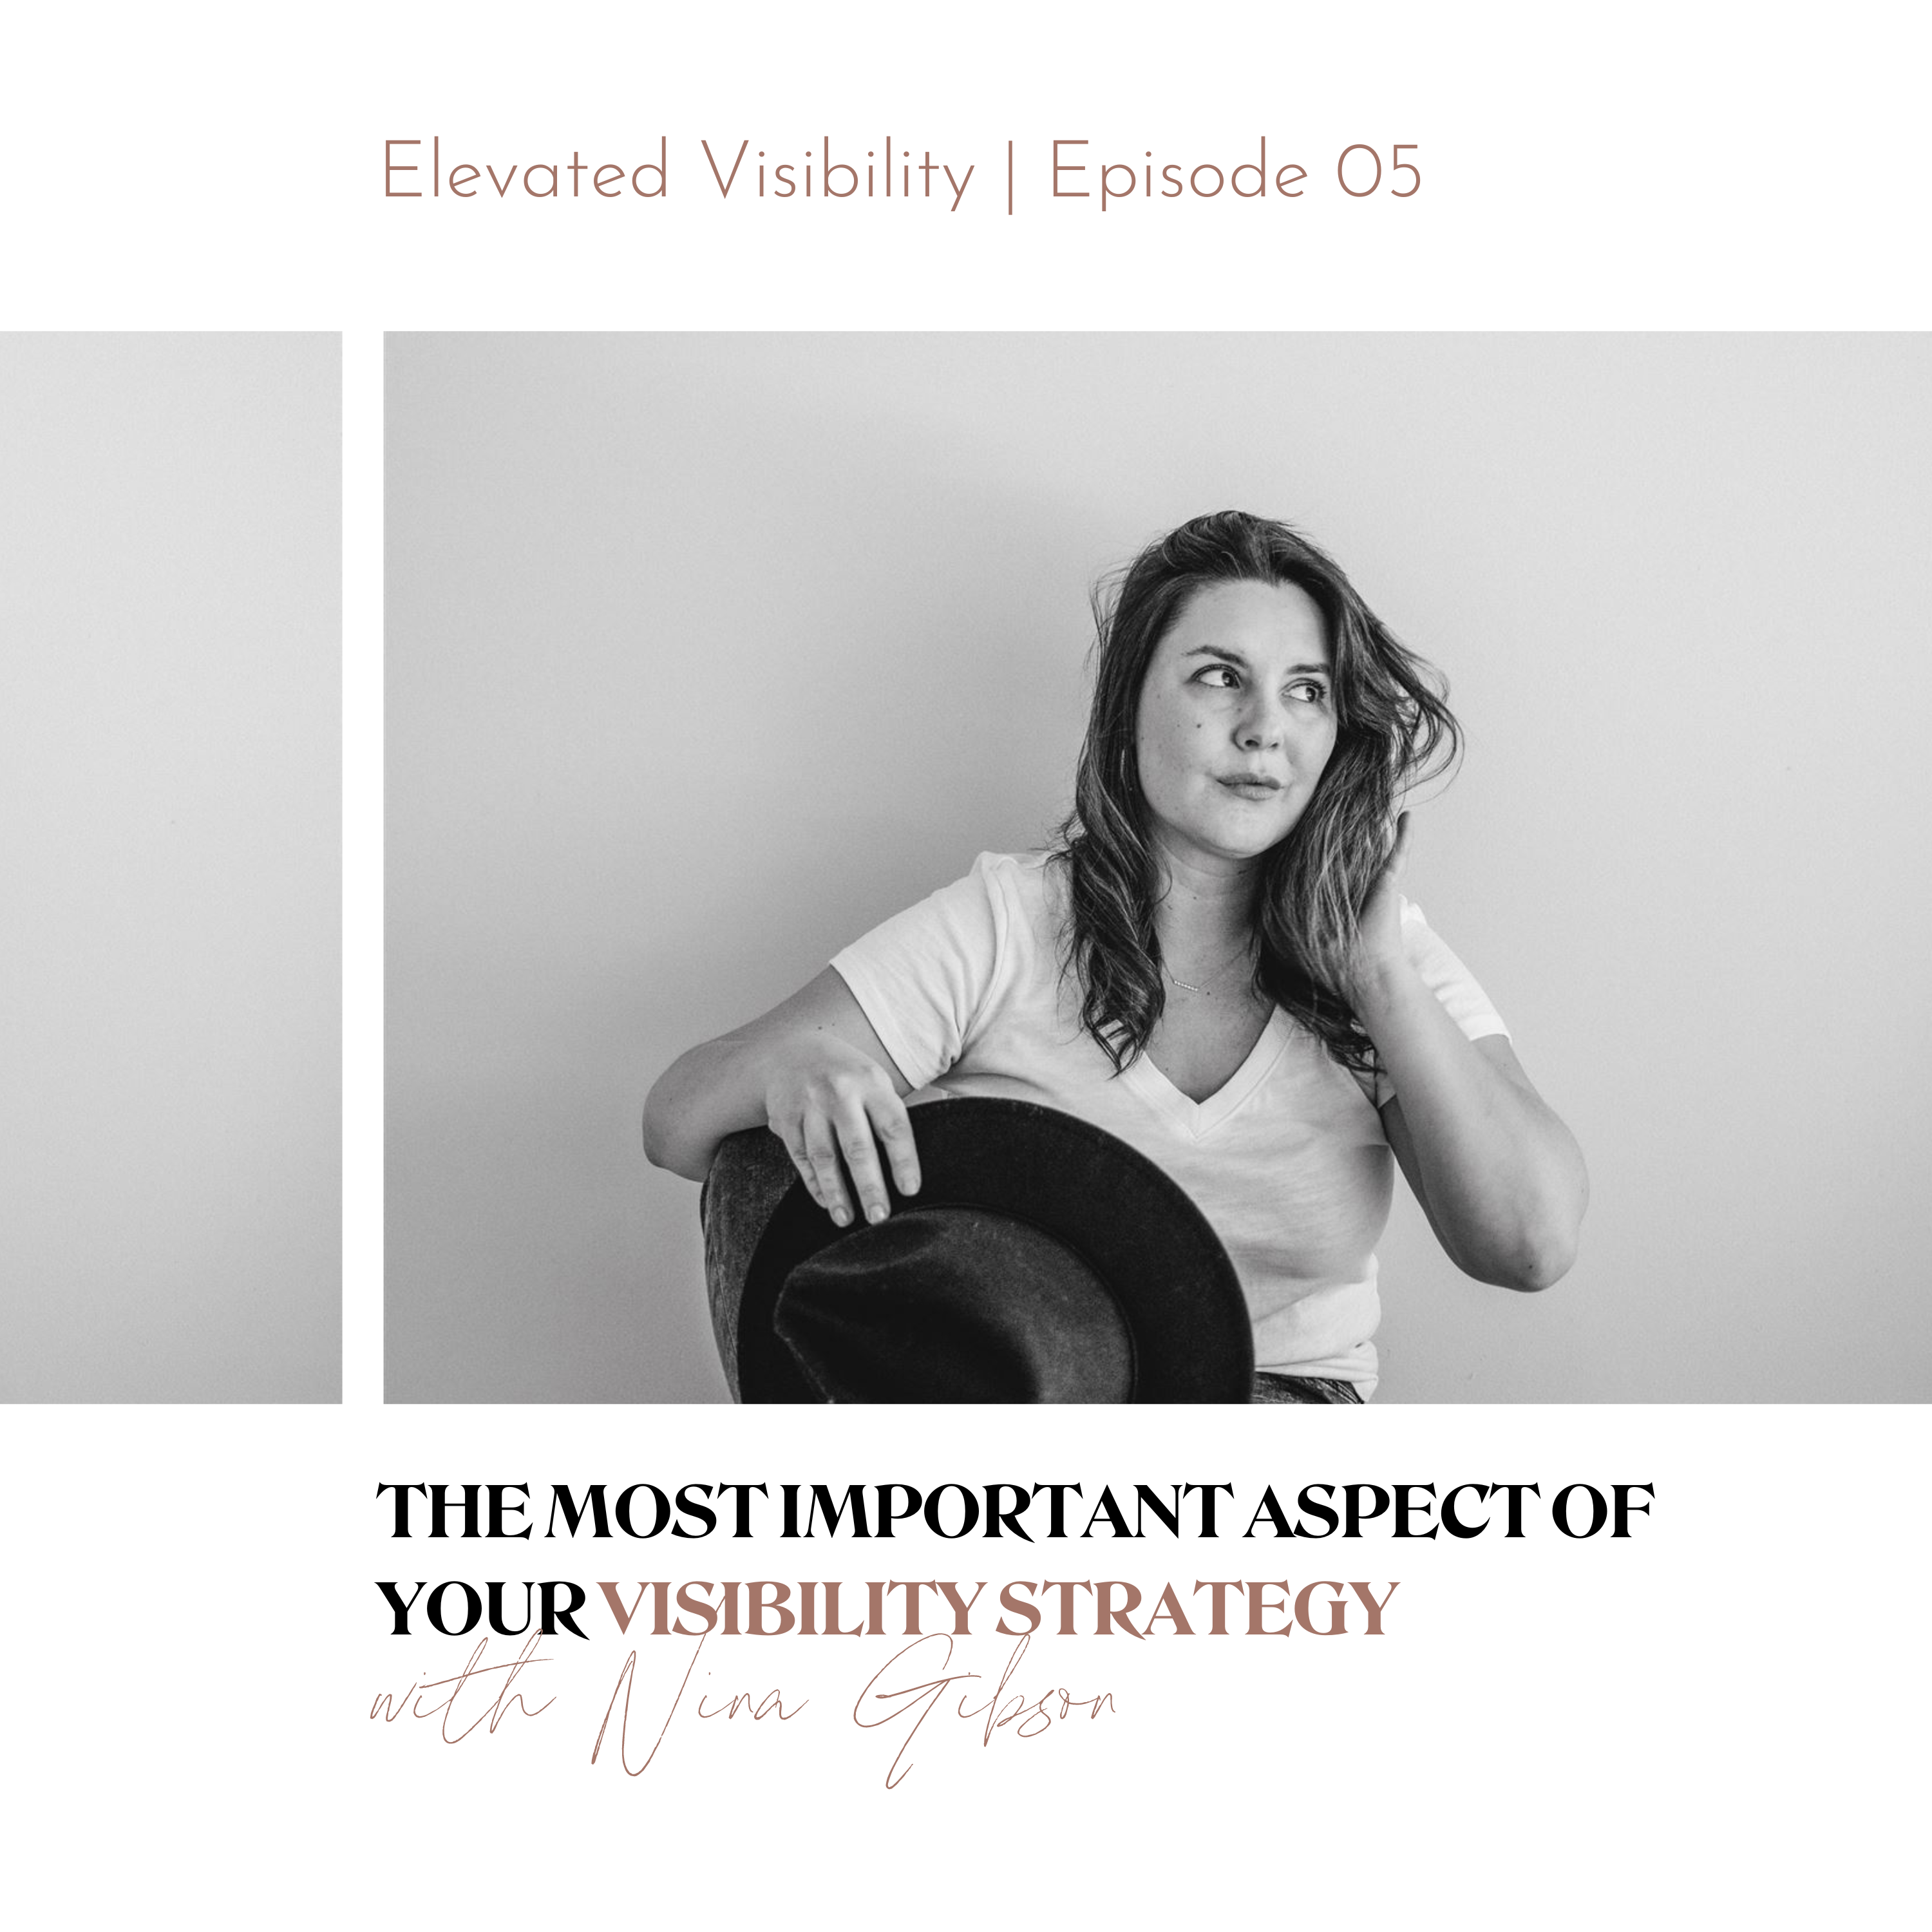 Episode 5 of The Elevated Visibility Podcast Cover Image